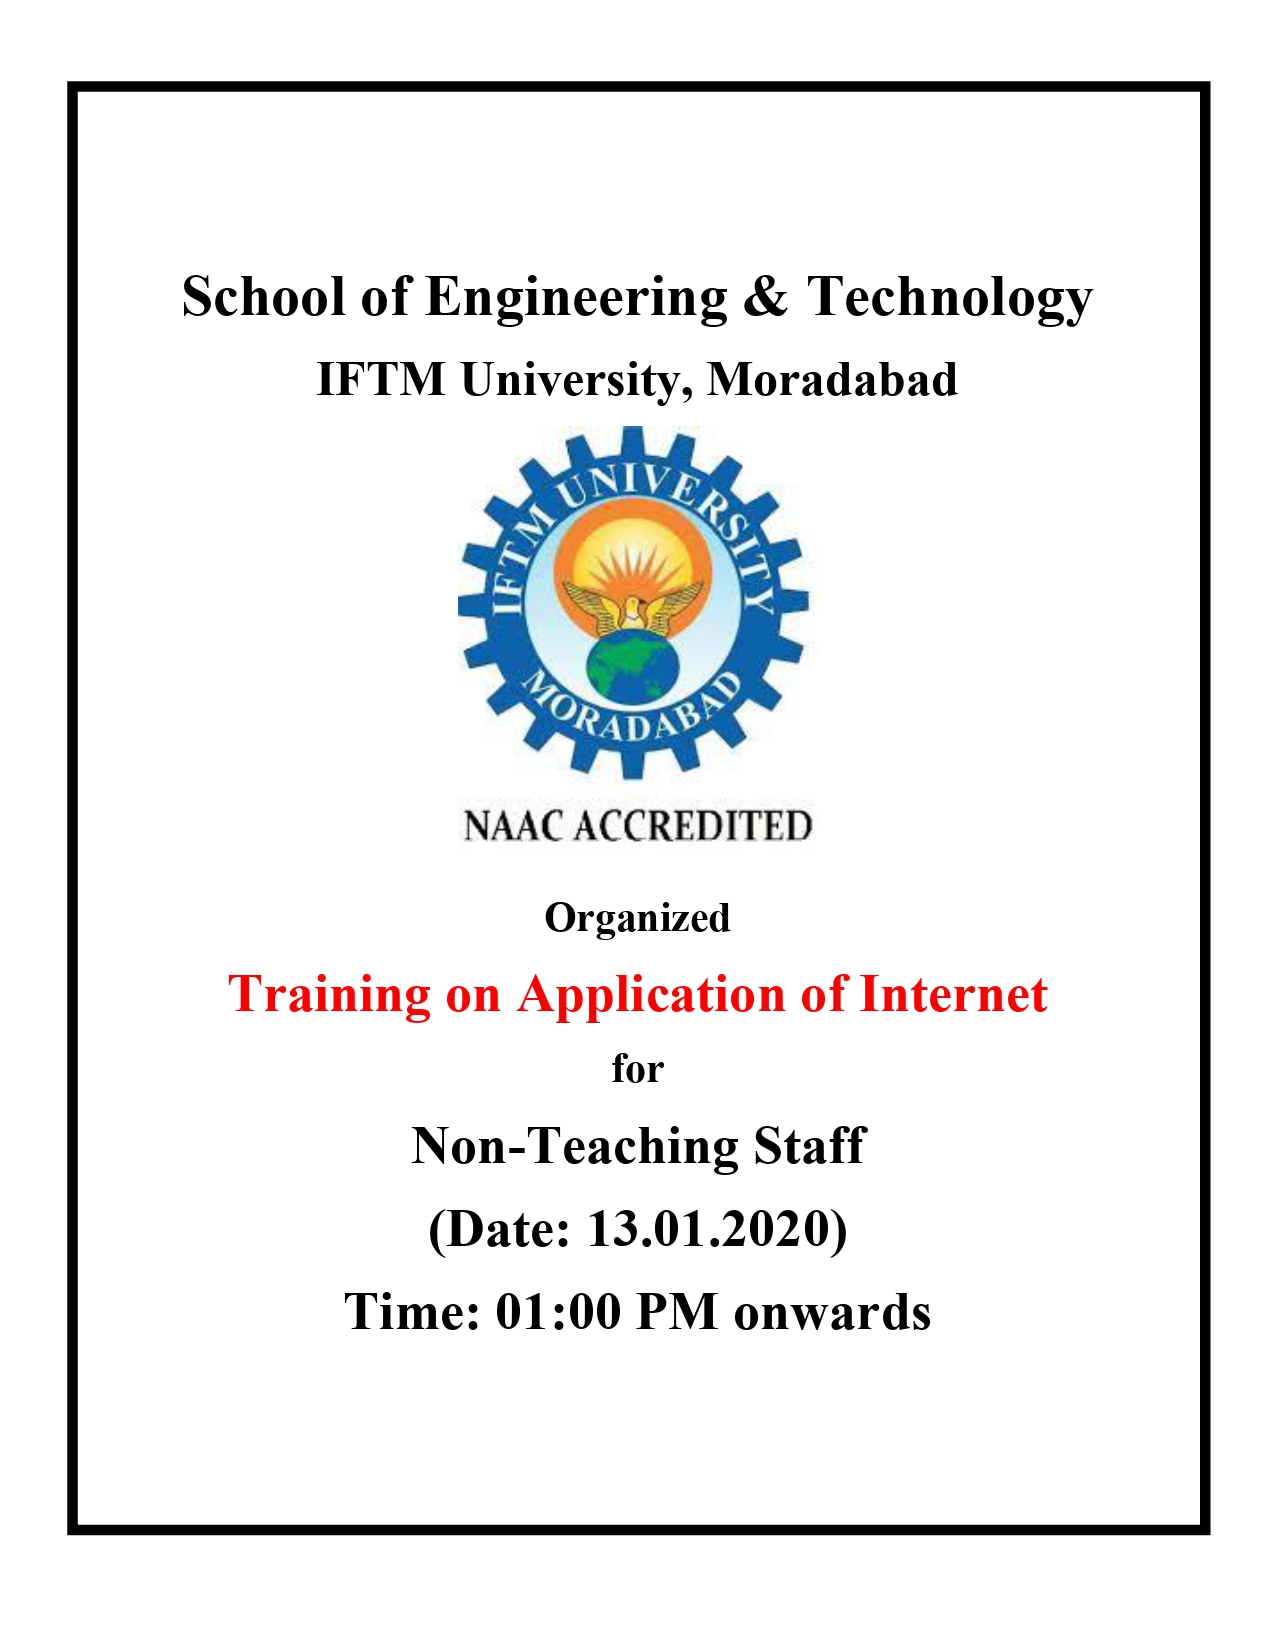 Training on Applications of Internet